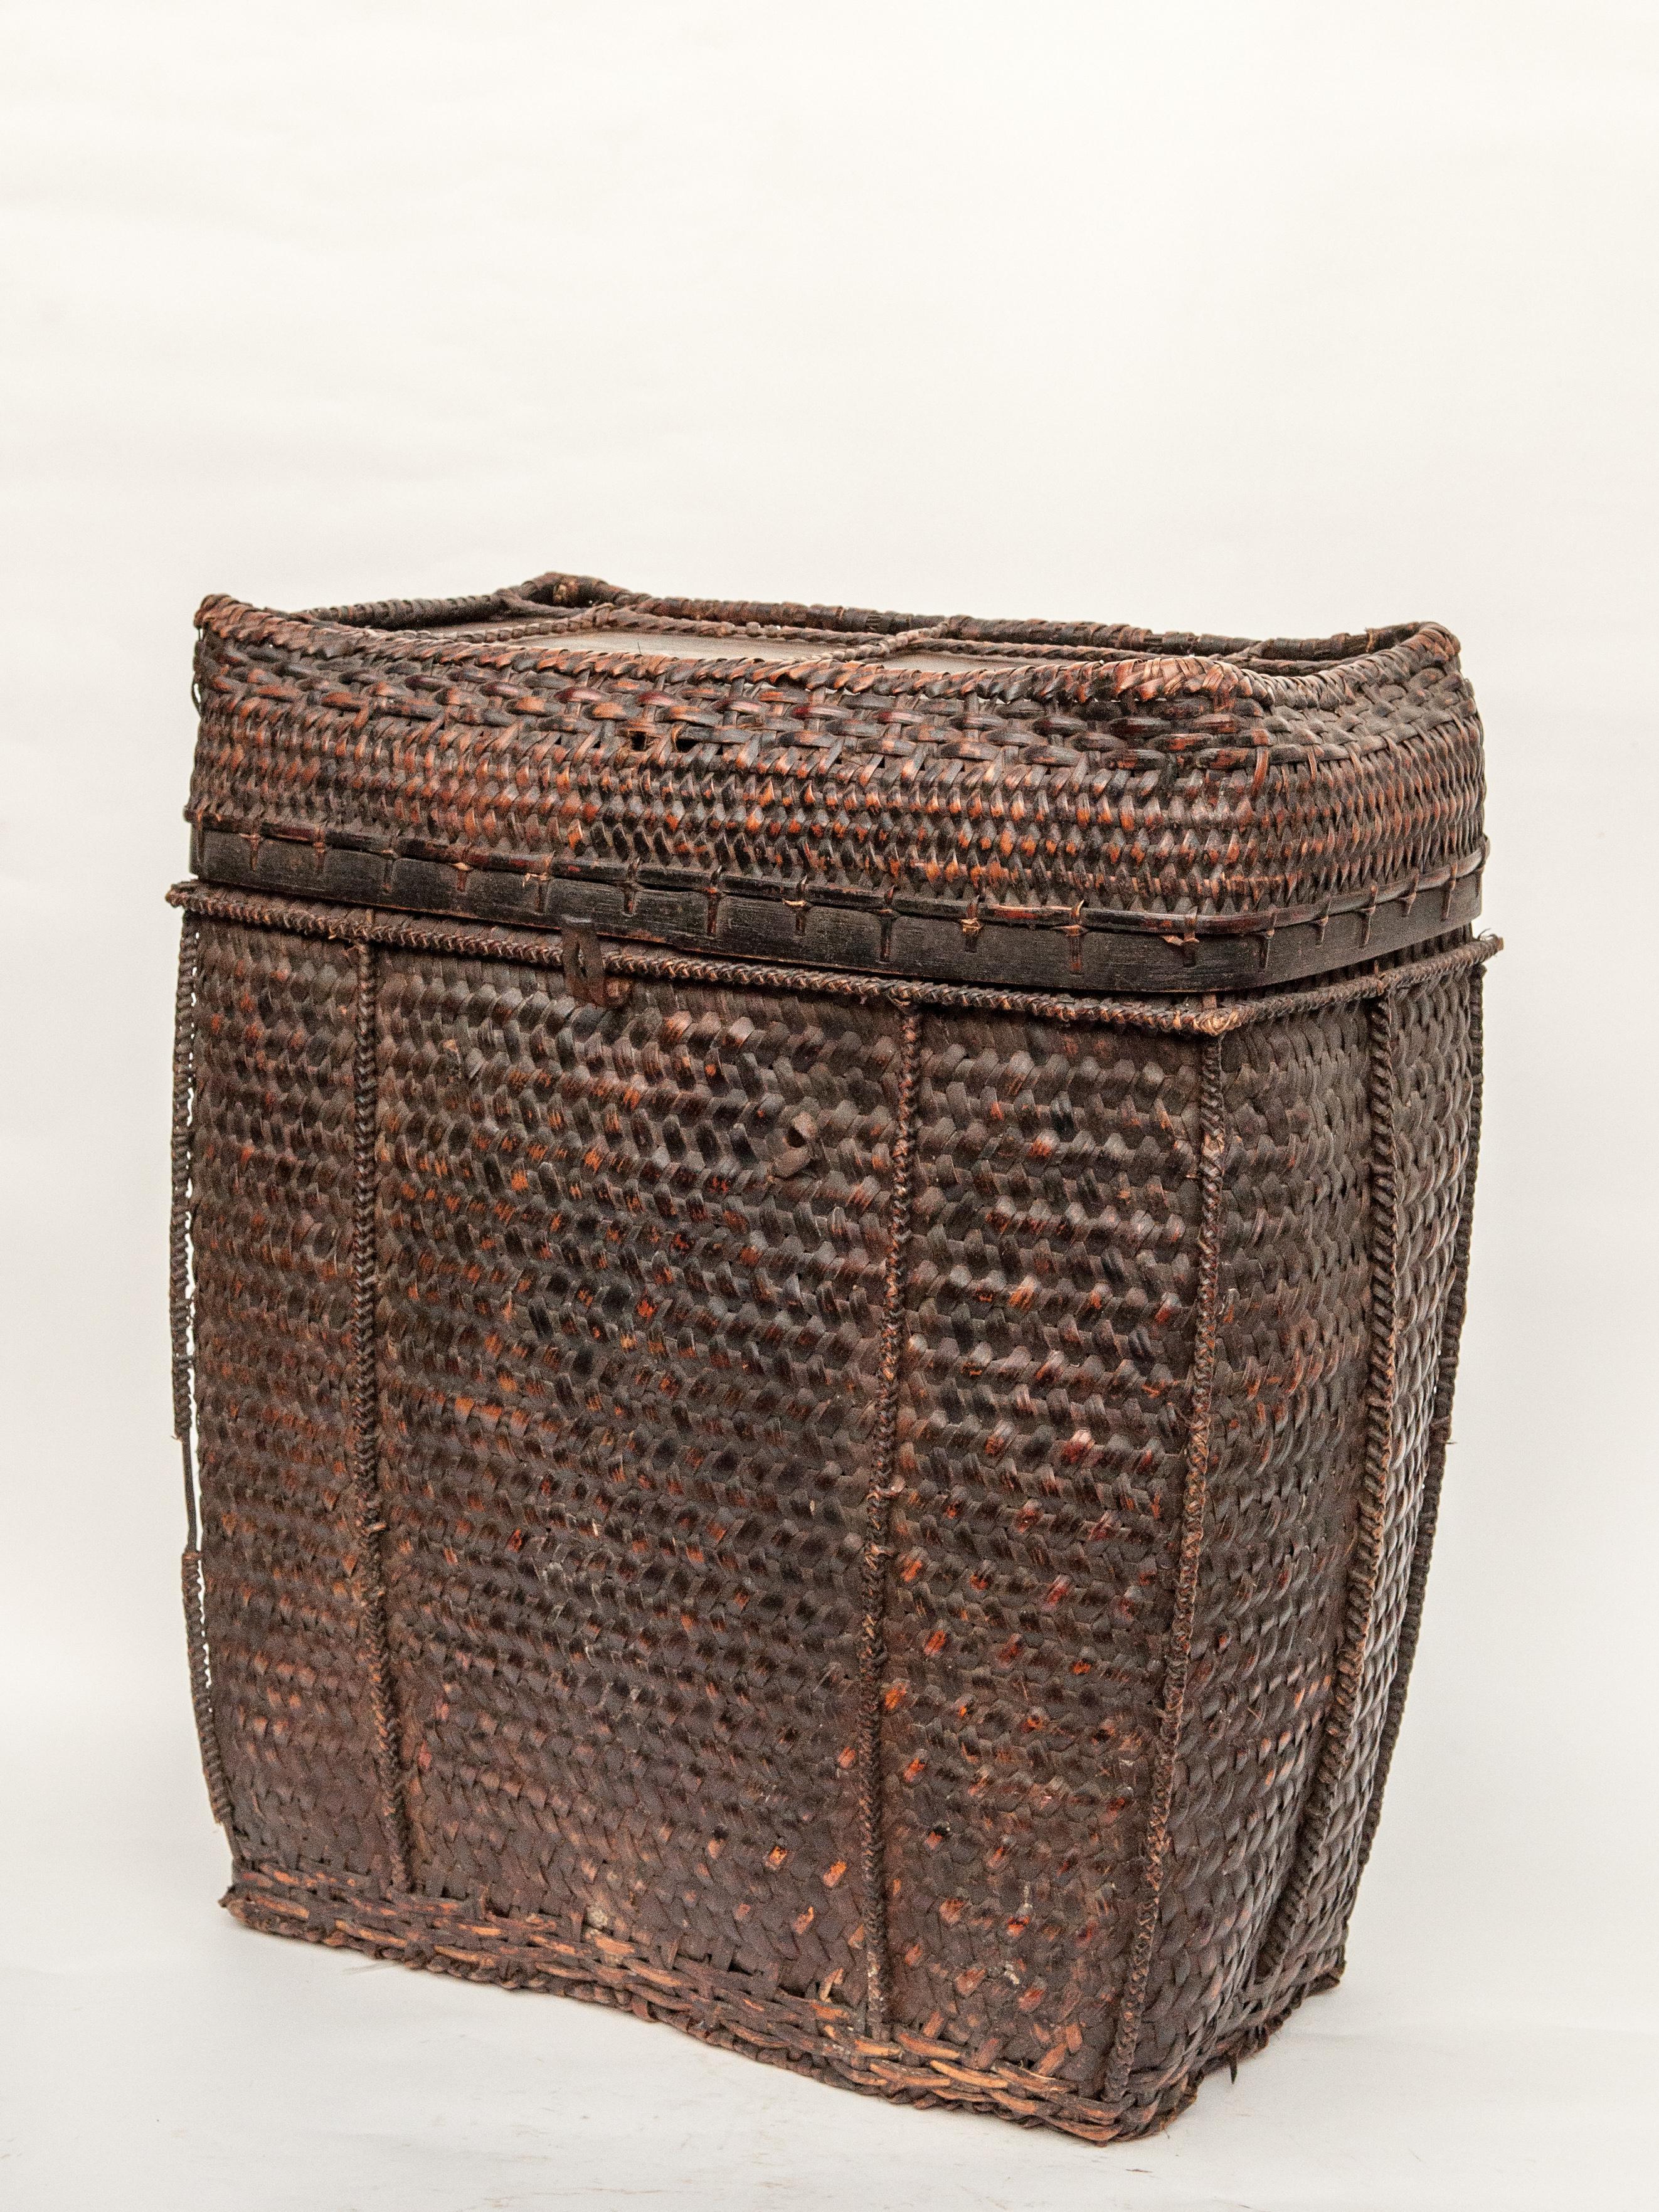 Large vintage tribal storage basket with lid from Bhutan, mid-late 20th century.
Handwoven of bamboo with wood incorporated into the base and top for added strength. This strong rustic basket would have been used to store household goods and